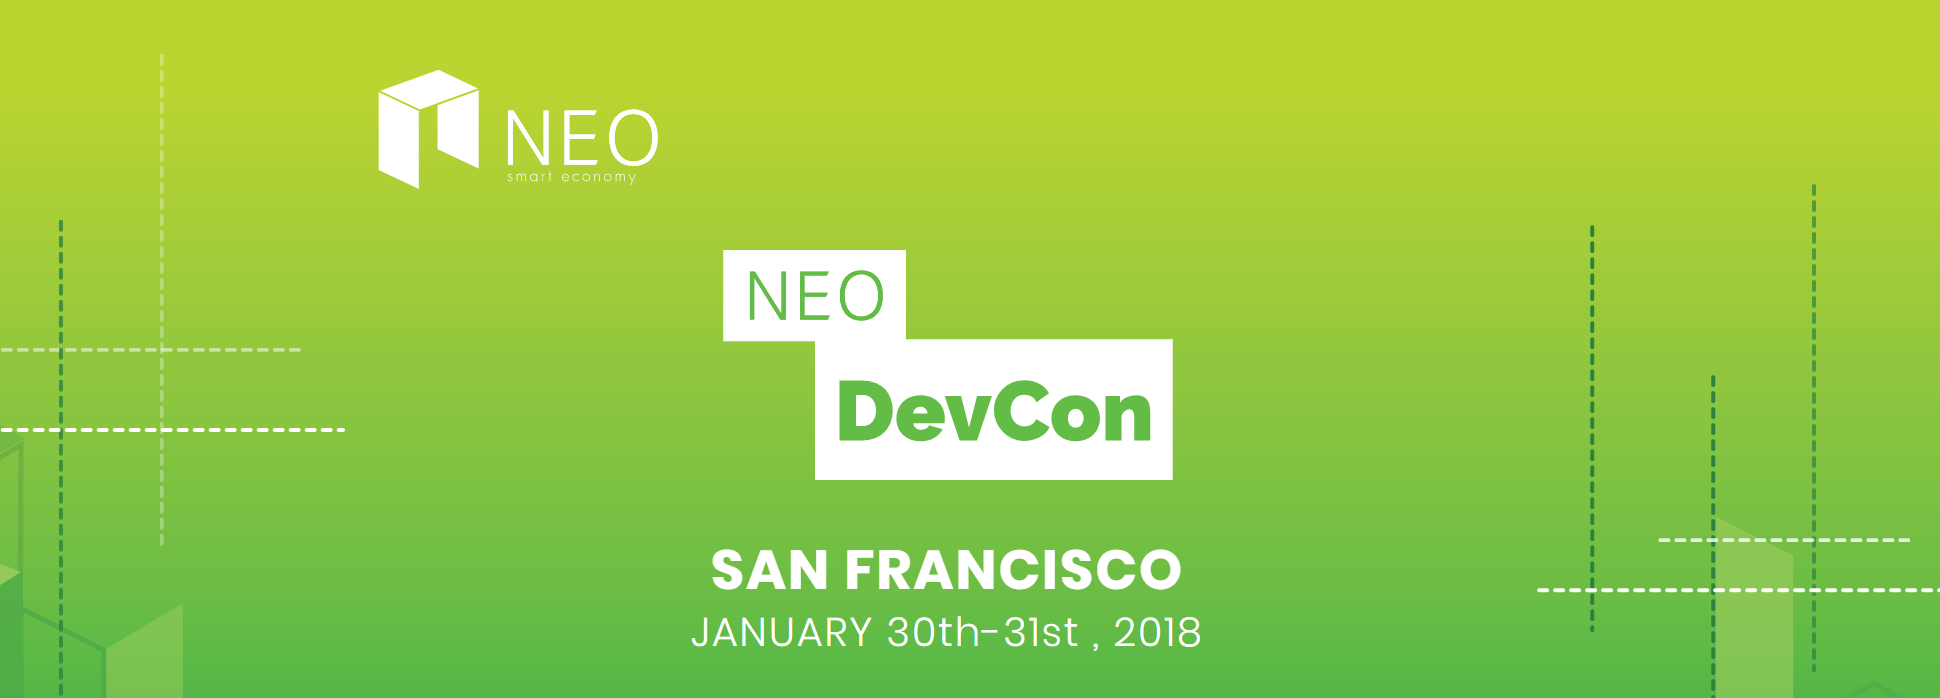 neodevcon.PNG